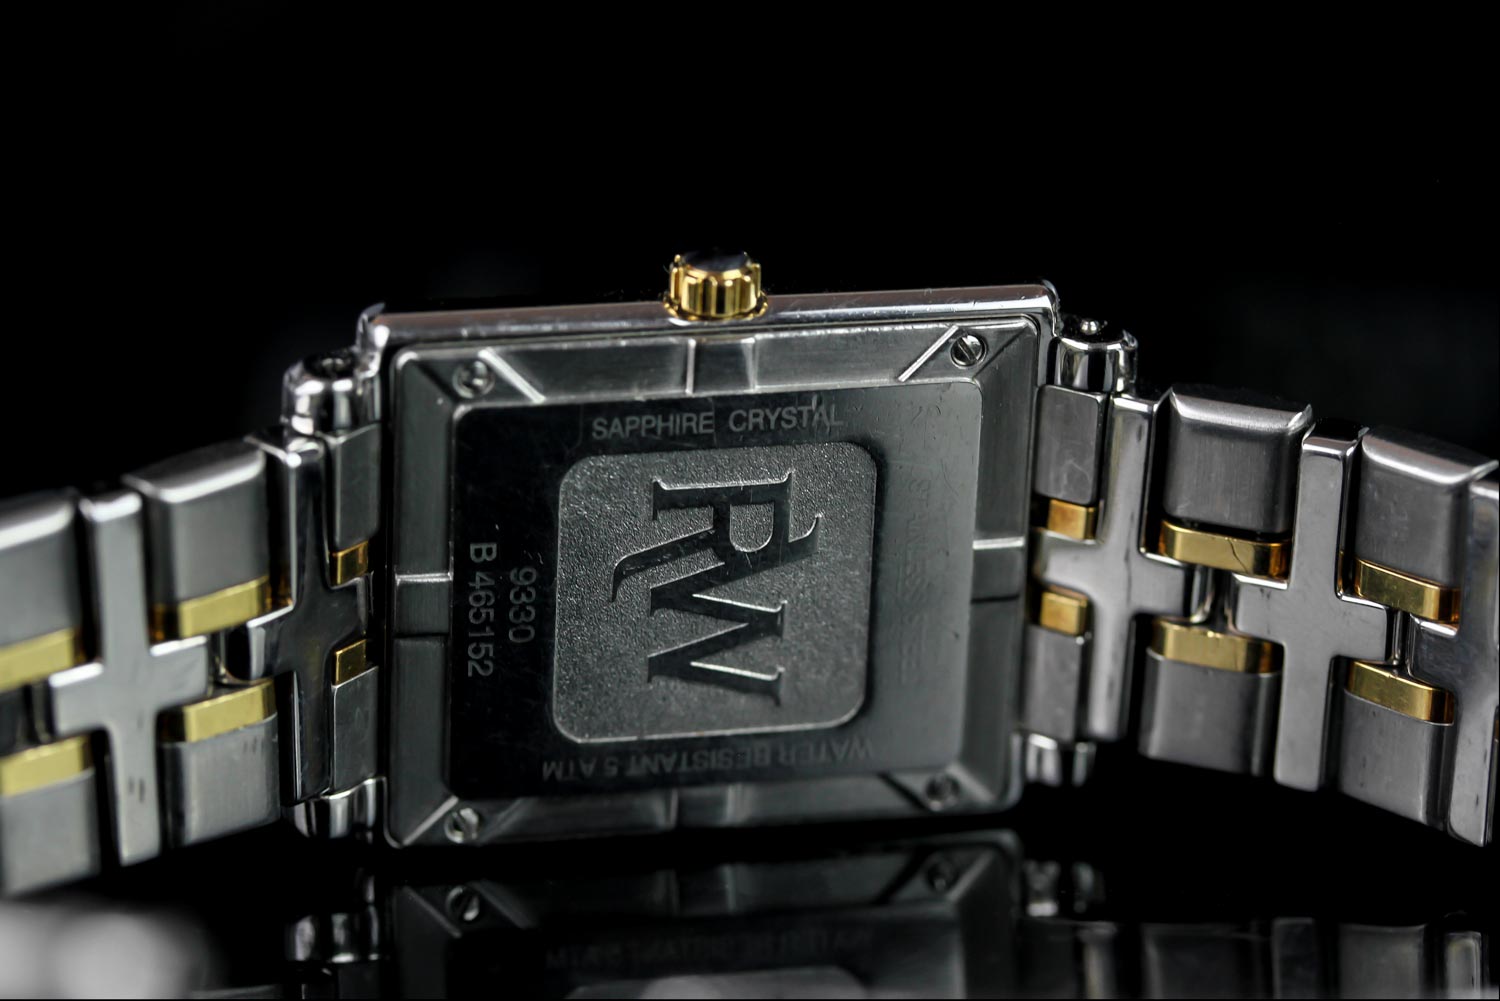 GENTLEMEN'S RAYMOND WEIL PARSIFAL WRISTWATCH REF 9330, rectangular mother of pearl dial with diamond - Image 3 of 3